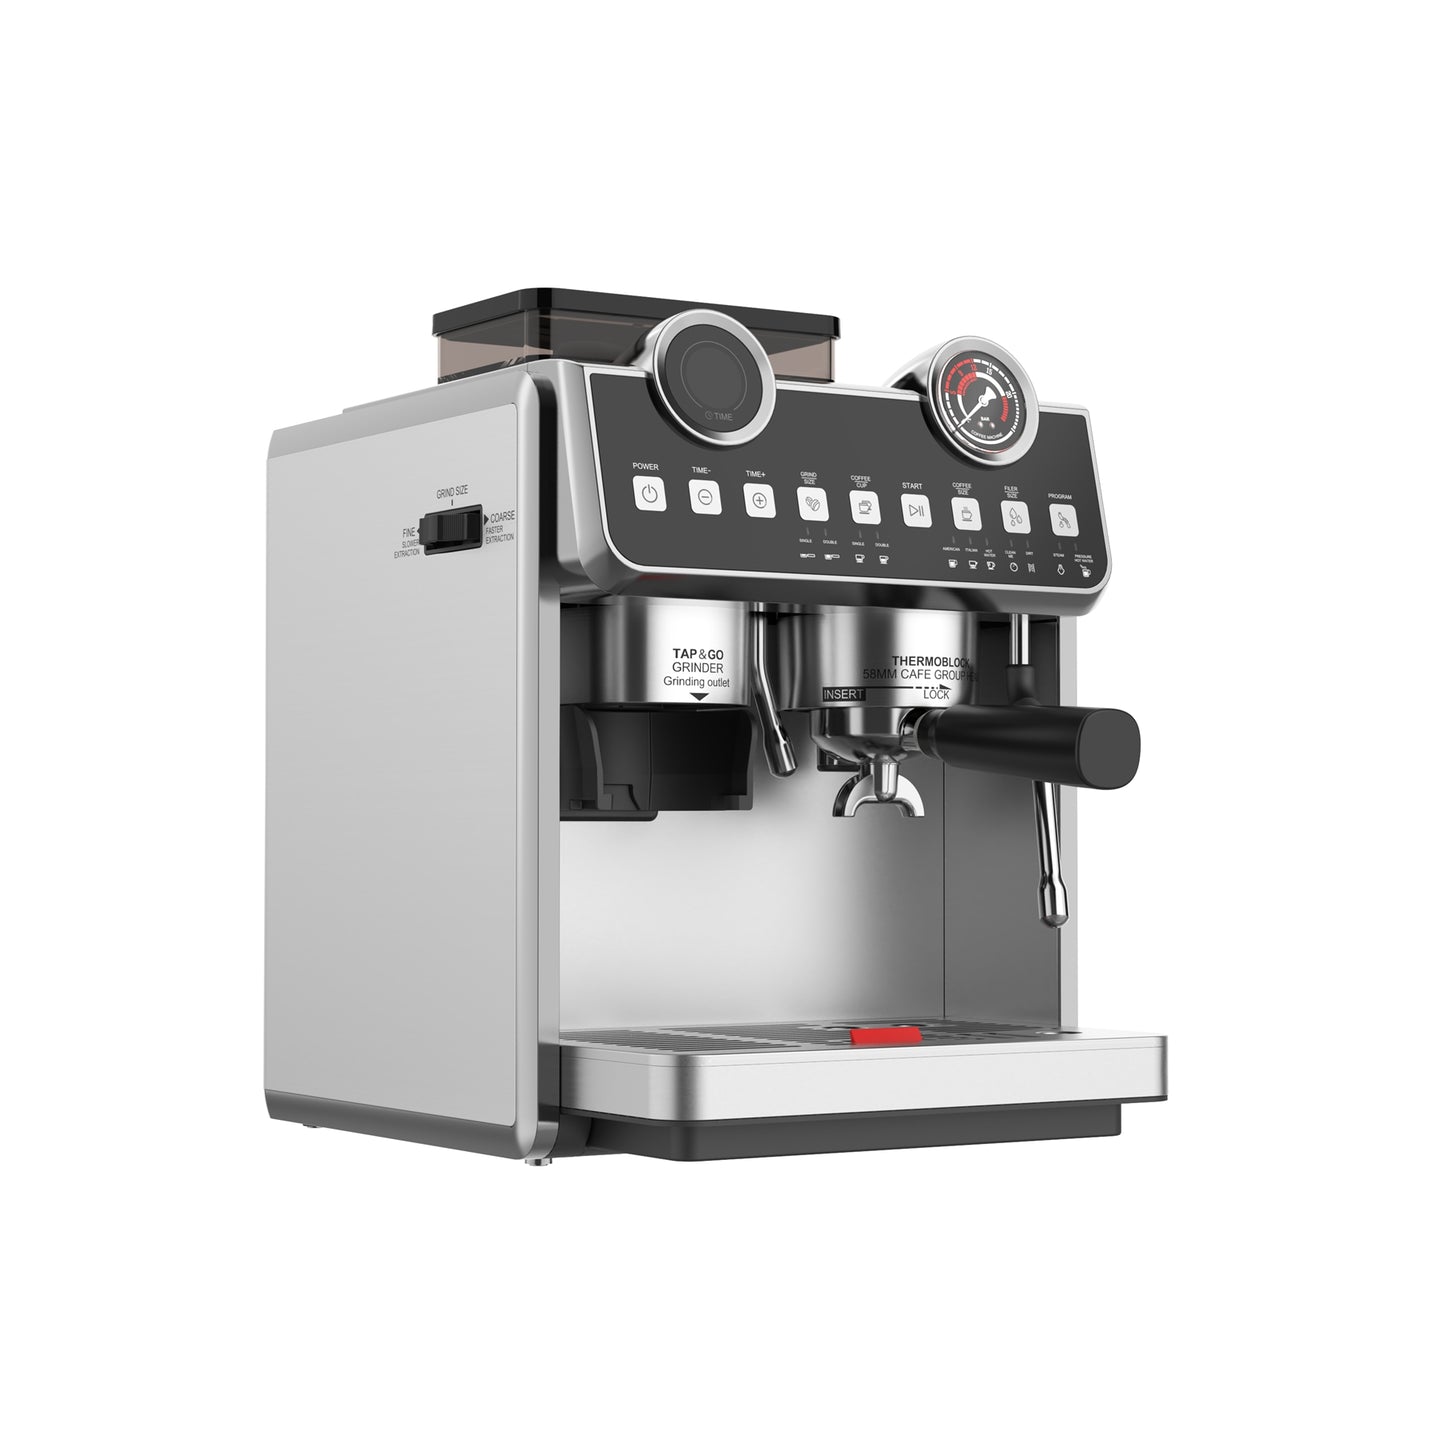 CHCOFF653 ESPRESSO Coffee Machine Double Boiler And Double Pump 20Bar Extraction With Bean Grinder